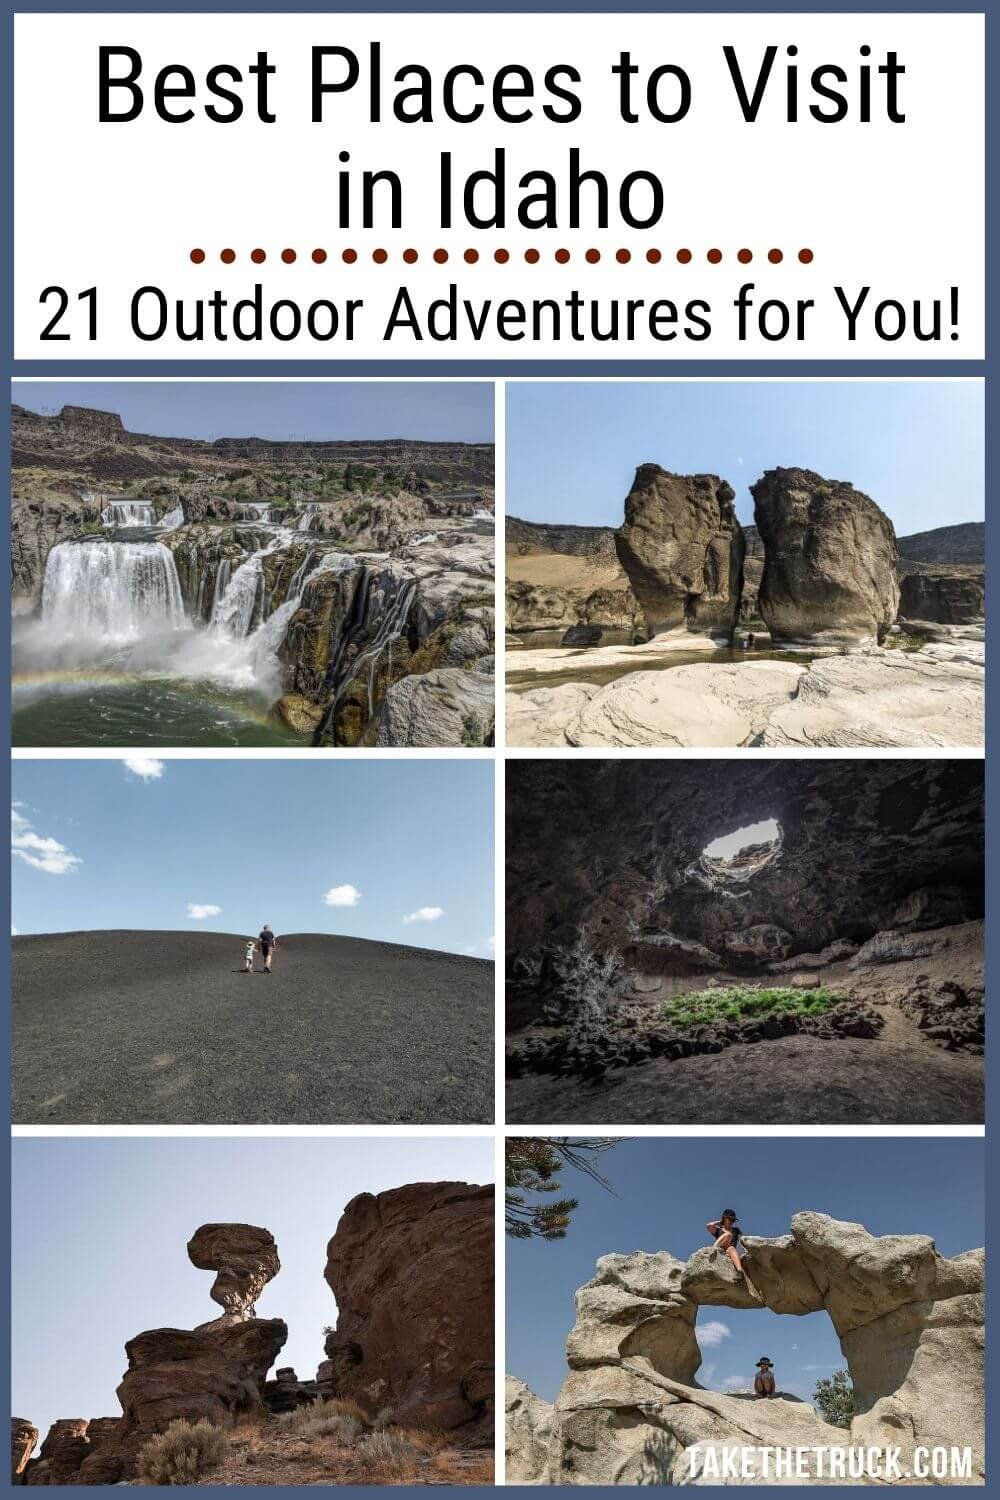 Doing some Idaho travel or an Idaho road trip? This post can help you find the top things to see in Idaho and the best things to do in Idaho - both northern Idaho and southern Idaho.